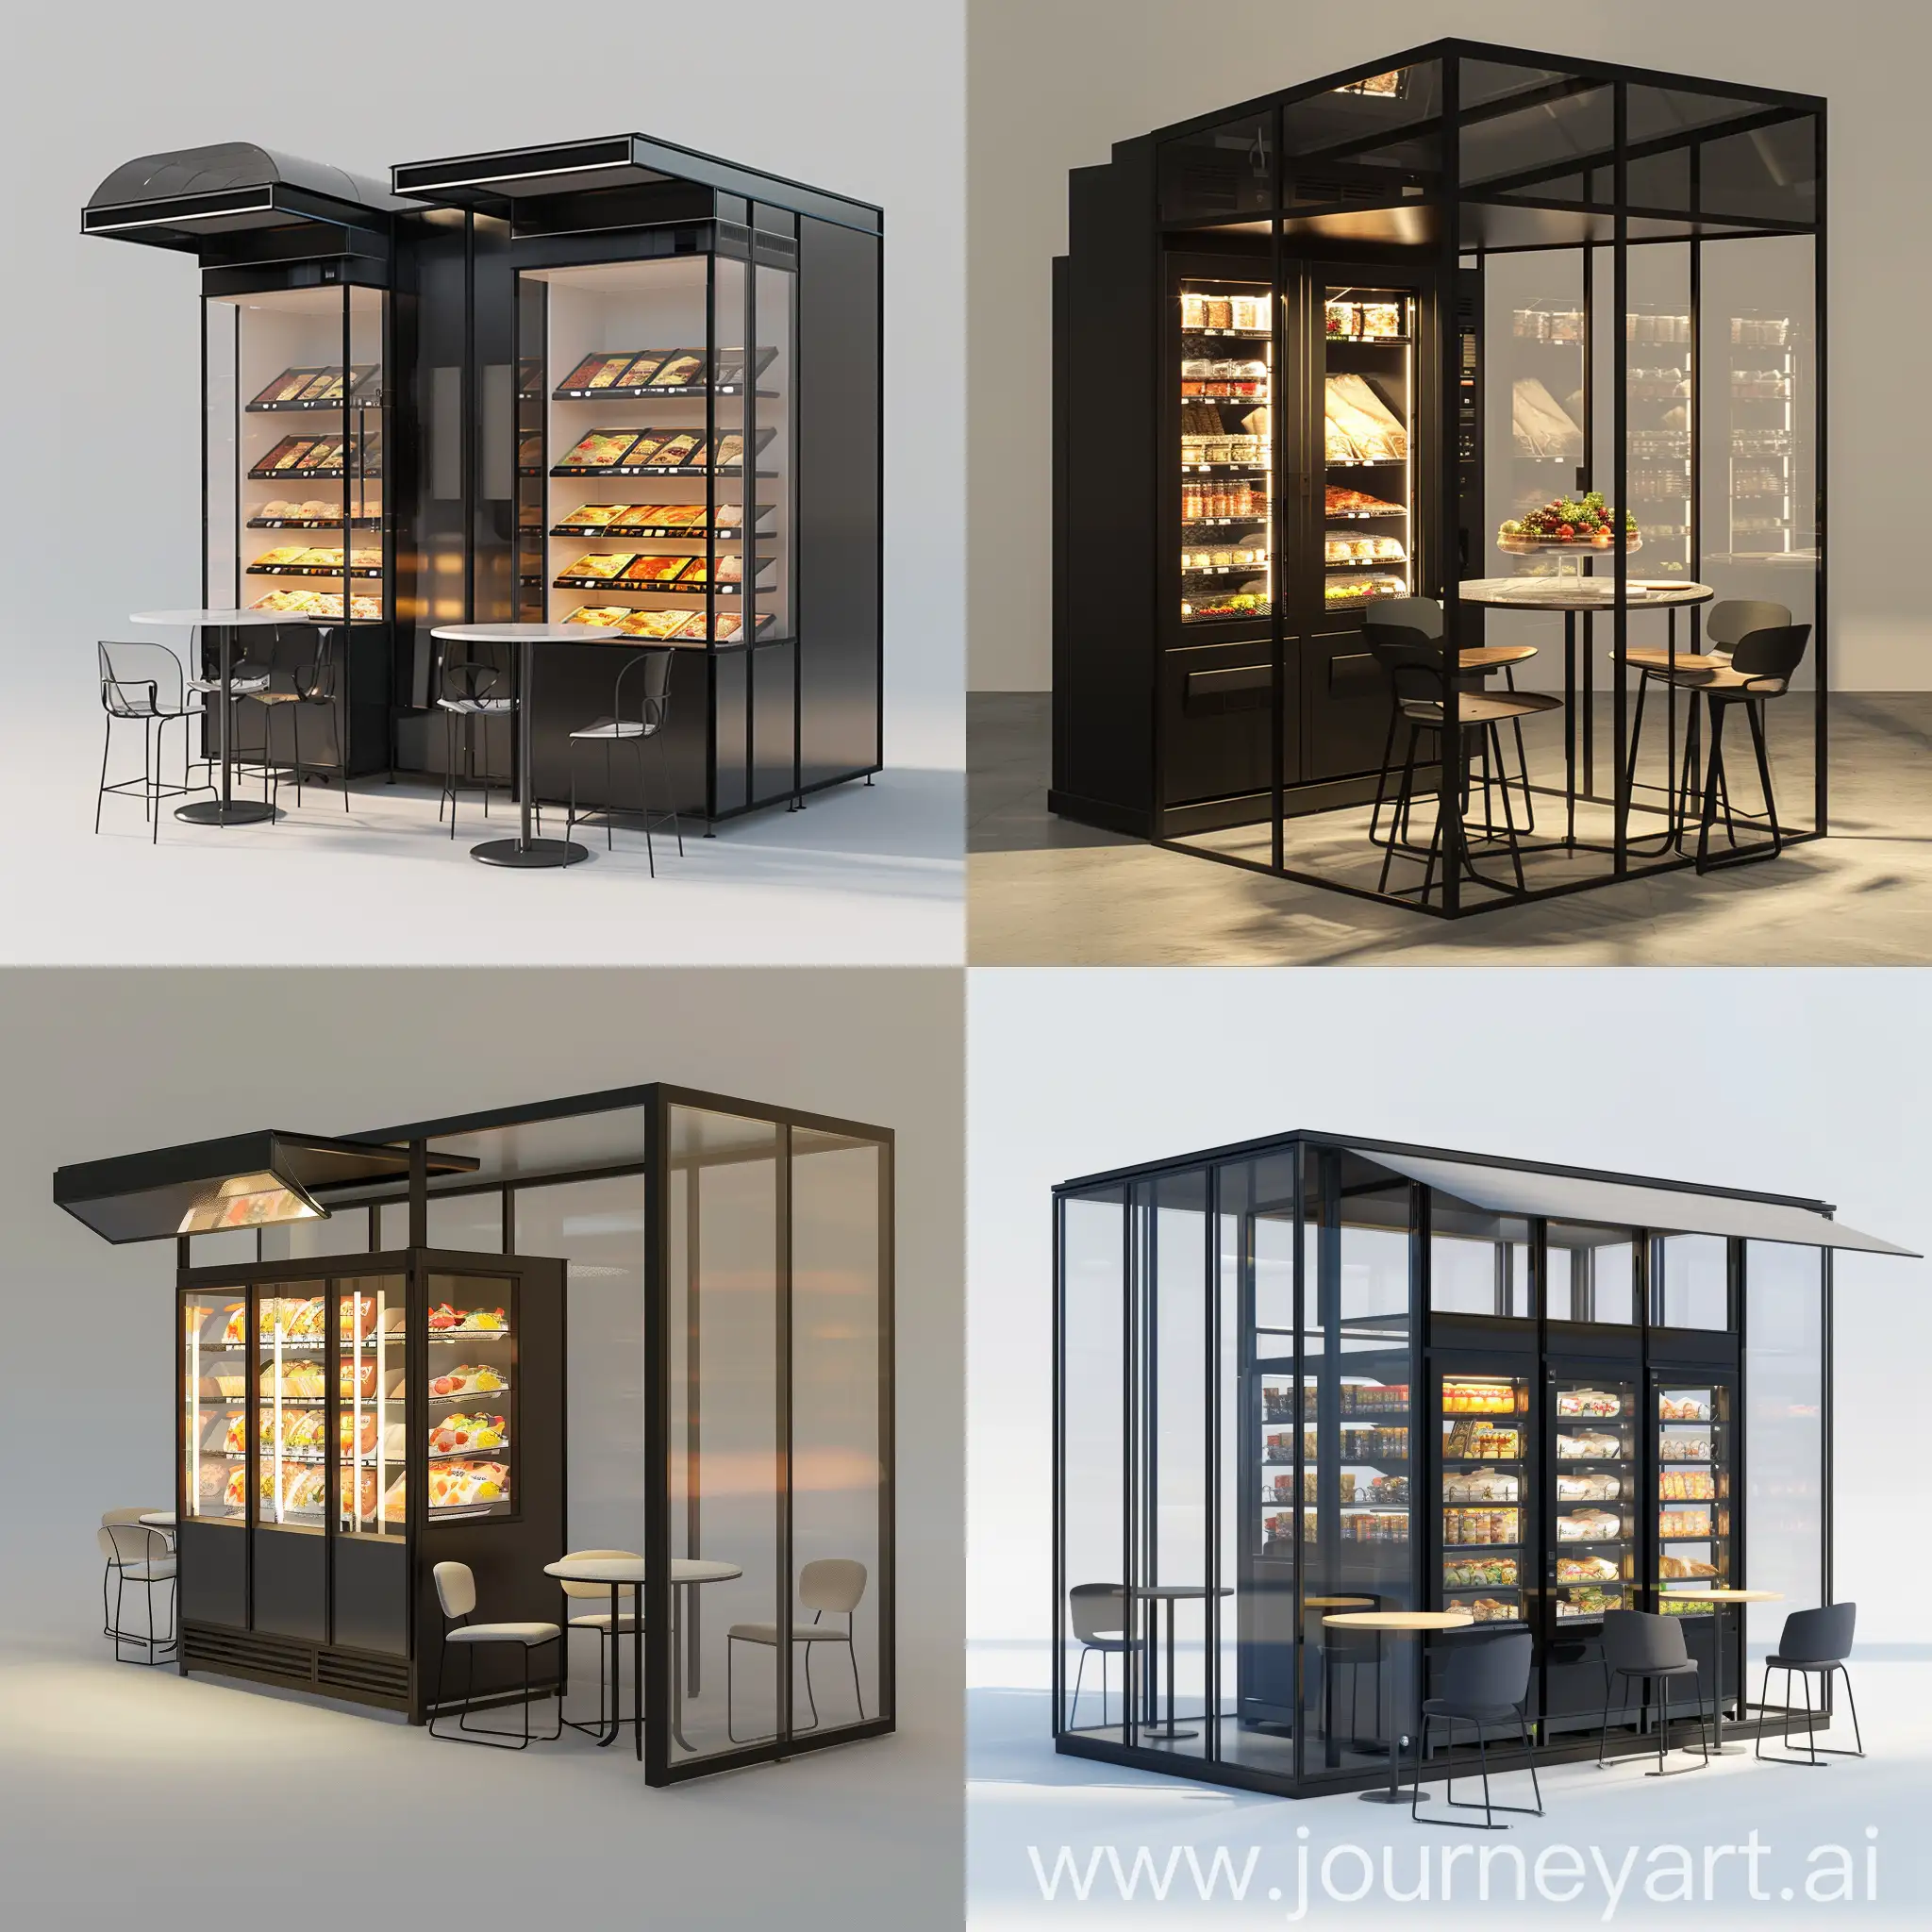 design me a frozen food vending machine in a rectangular shape of 8x4x3meters with a little canopy, side panels and just two round tables with two chairs each with an unique modern architectural style in black glass and plays of light